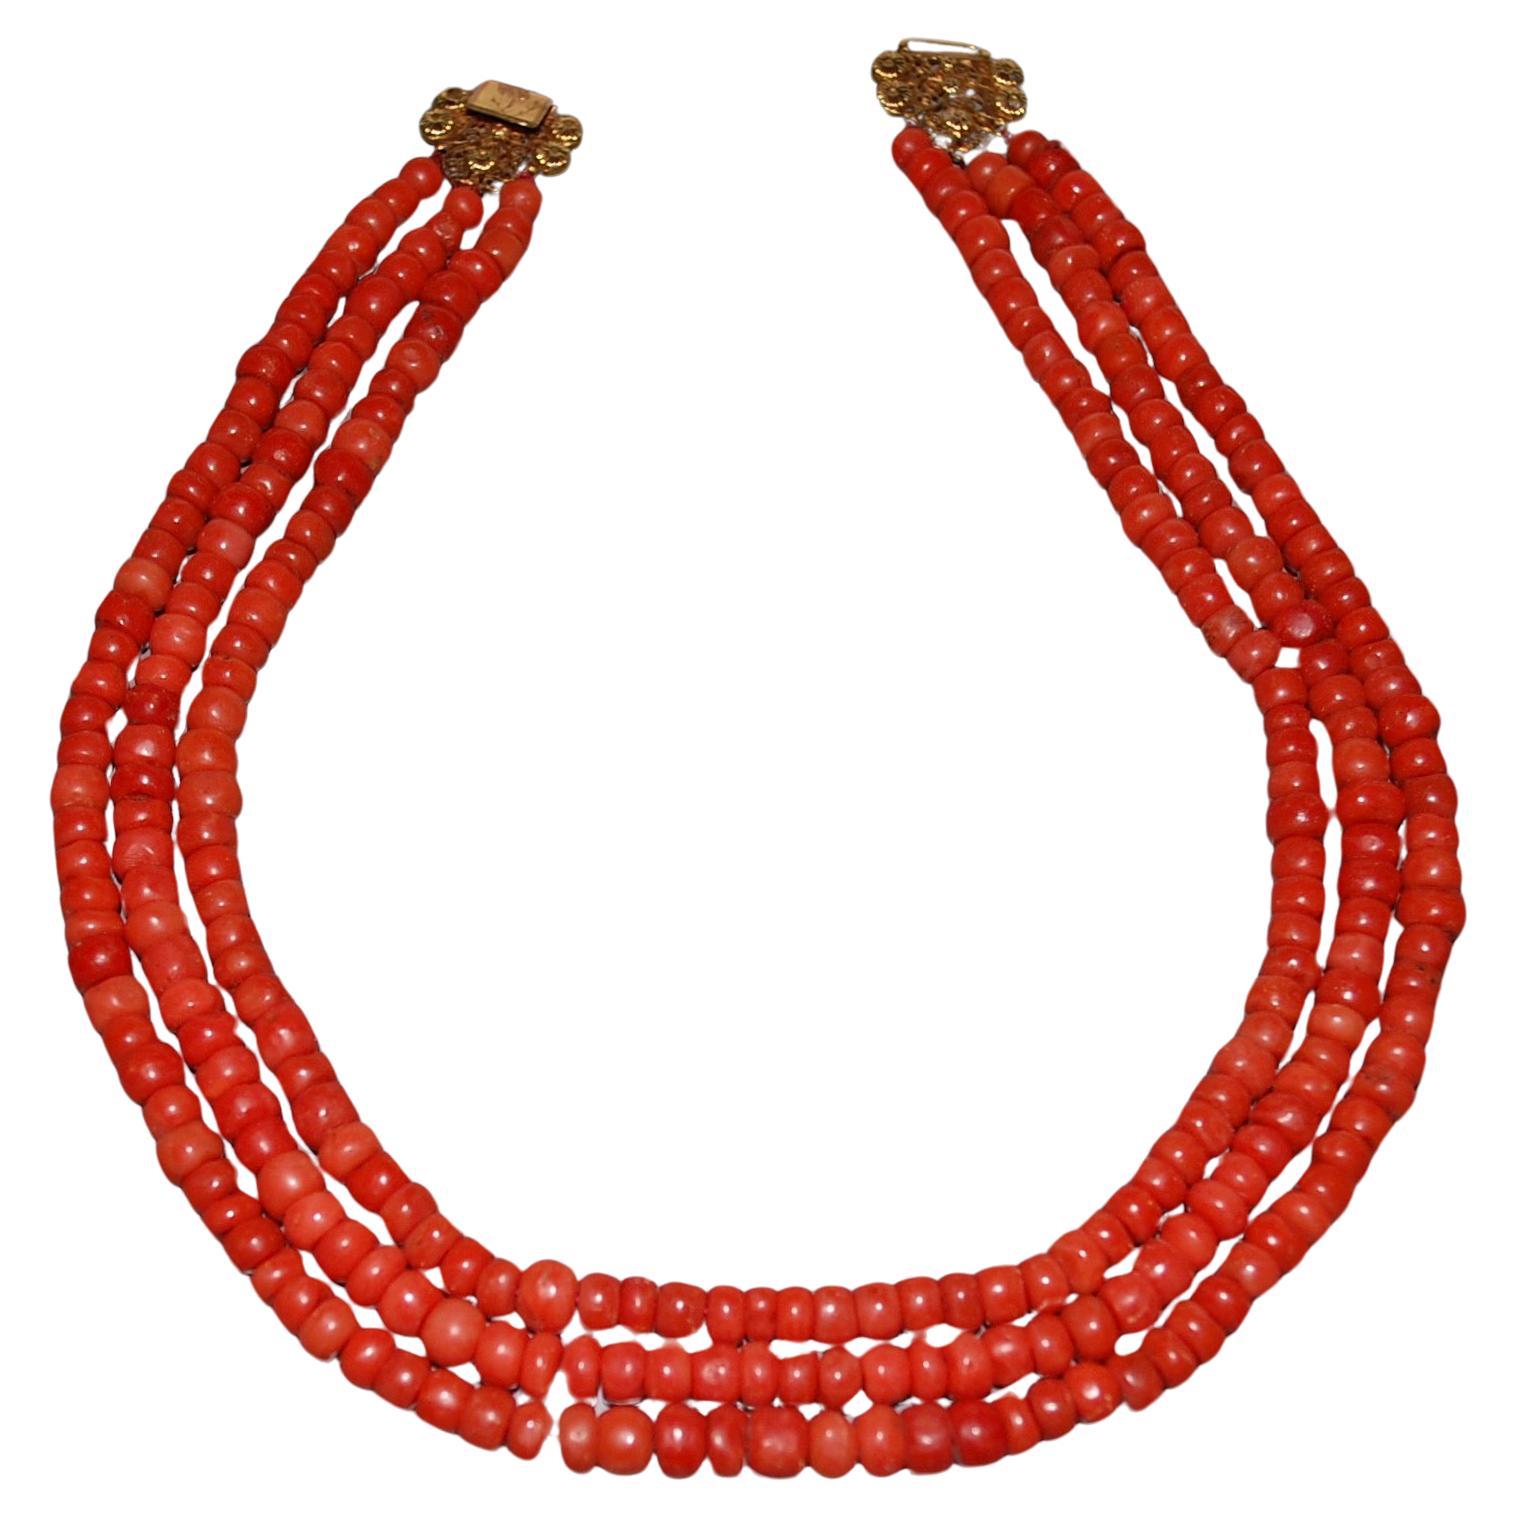 Stunning antique Coral necklace.
A three strand of fine European natural red/salmon coral  necklace beads about 5-6mm. The coral beads are barrel-shaped and the handmade clasp is made of 14k yellow gold. The clasp is absolutely gorgeous with